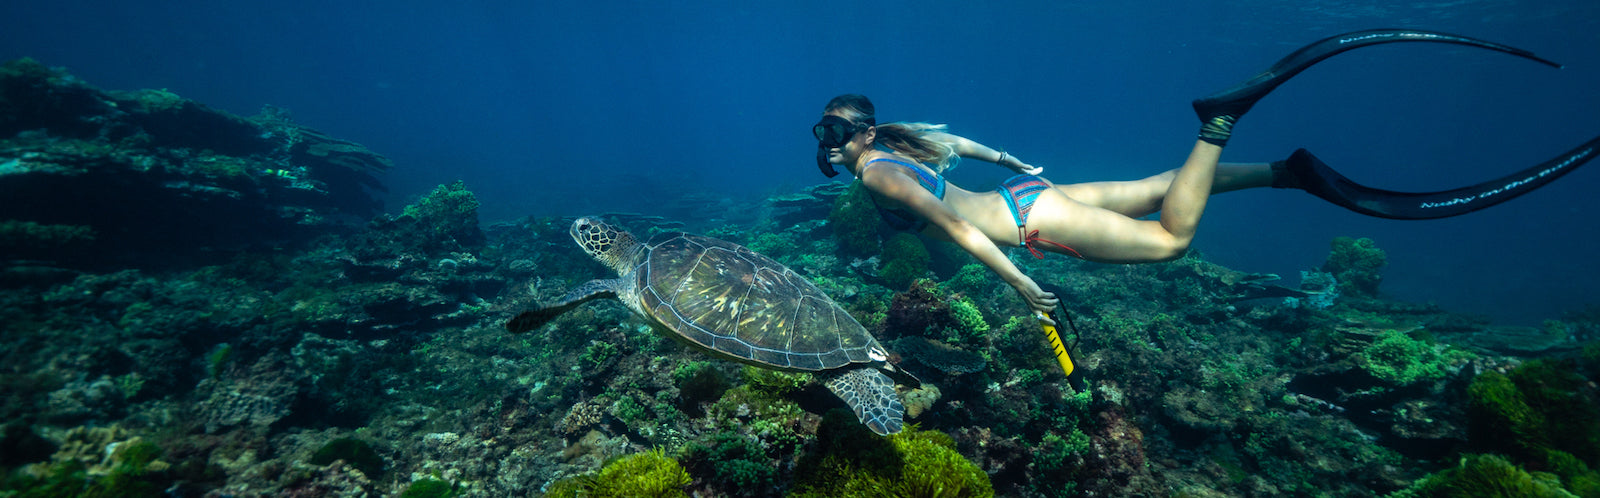 SNORKELING_WITH_TURTLE